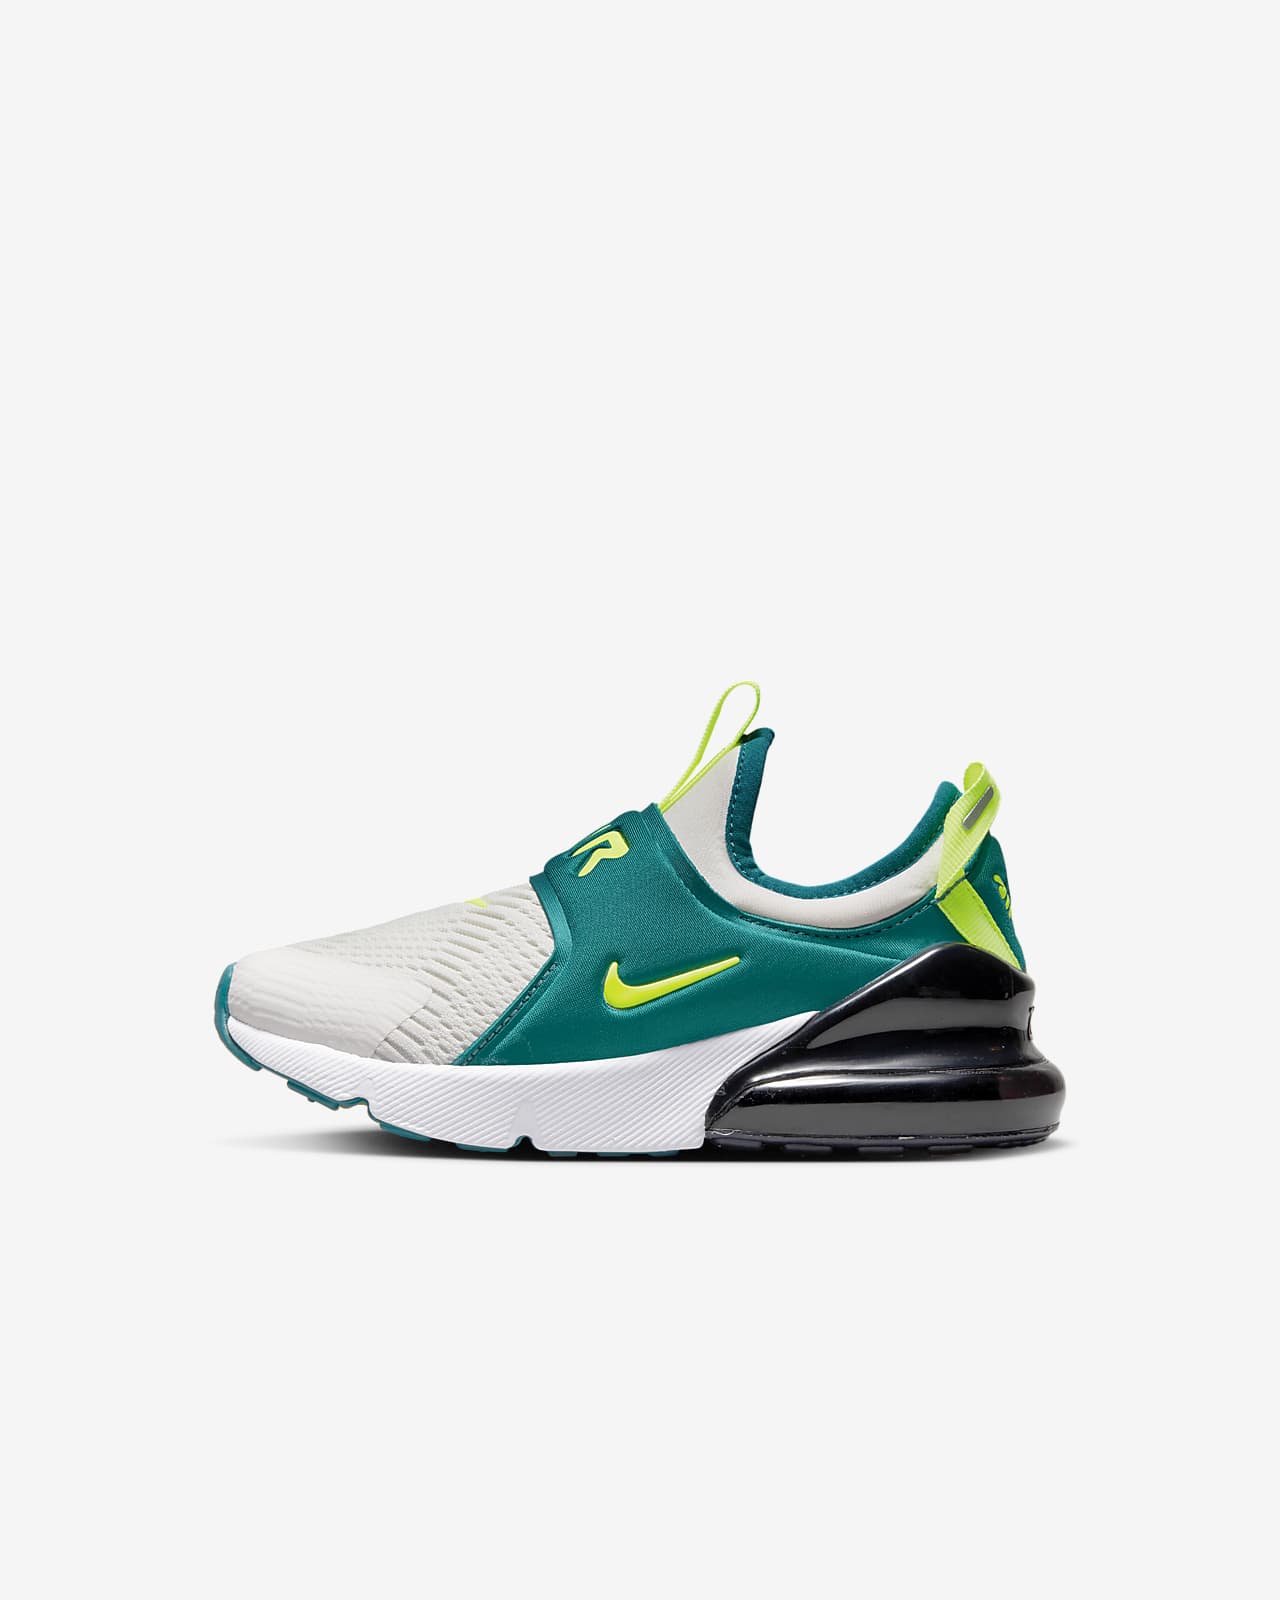 Nike Air Max 270 Extreme Little Kids’ Shoes